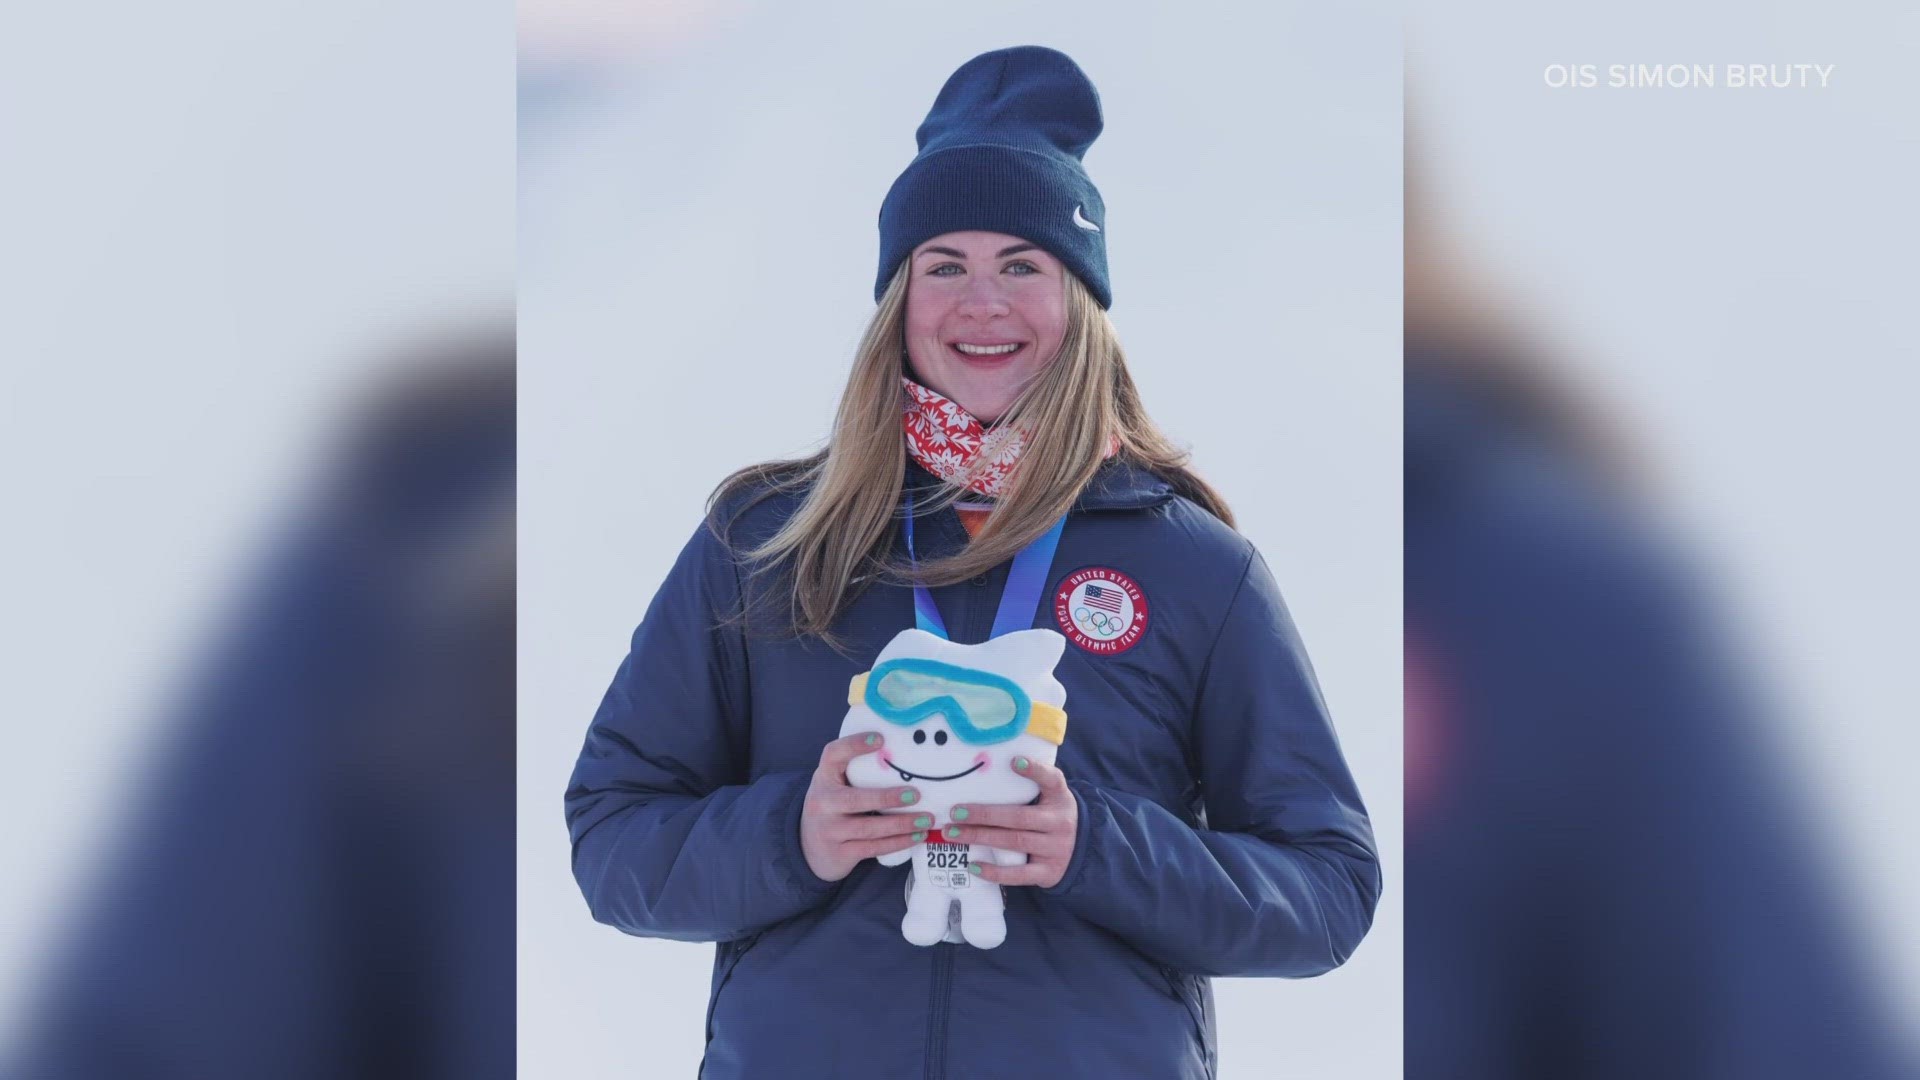 Morgan Shute, who attends Carrabassett Valley Academy, won a pair of silver medals. Five other Maine athletes took part.